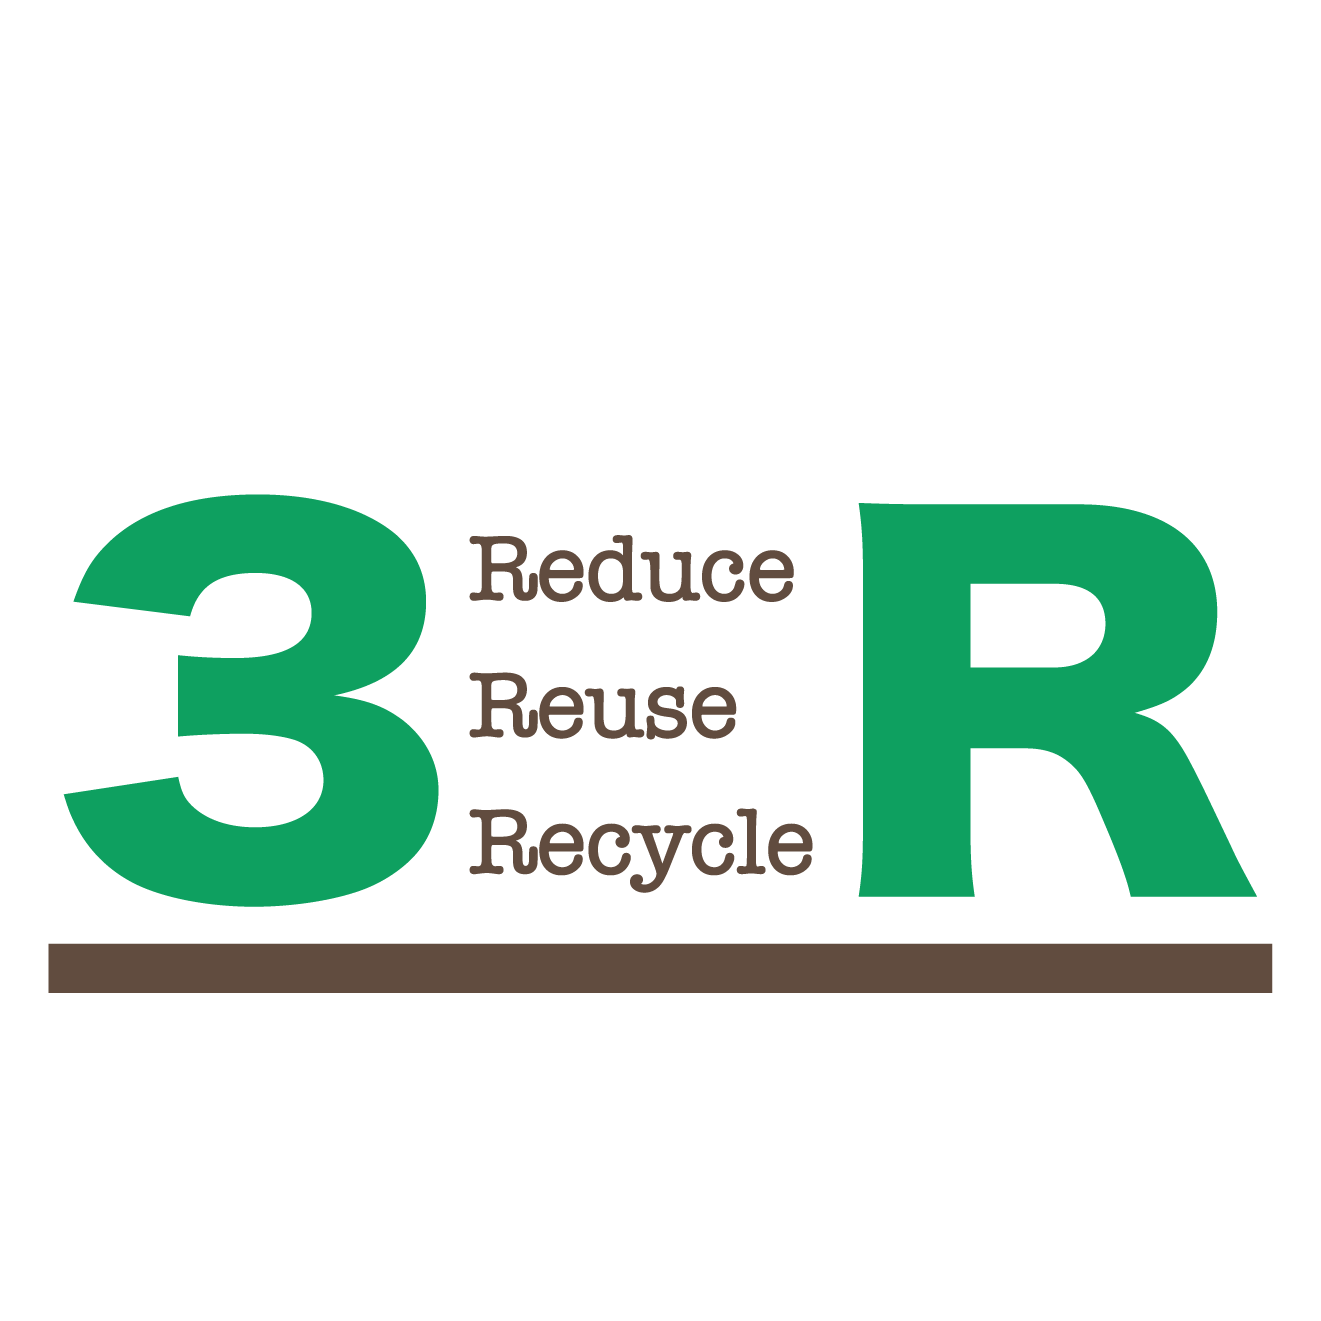 3r Reduceリデュース Reuseリユーズ Recycleリサイクル のイラスト